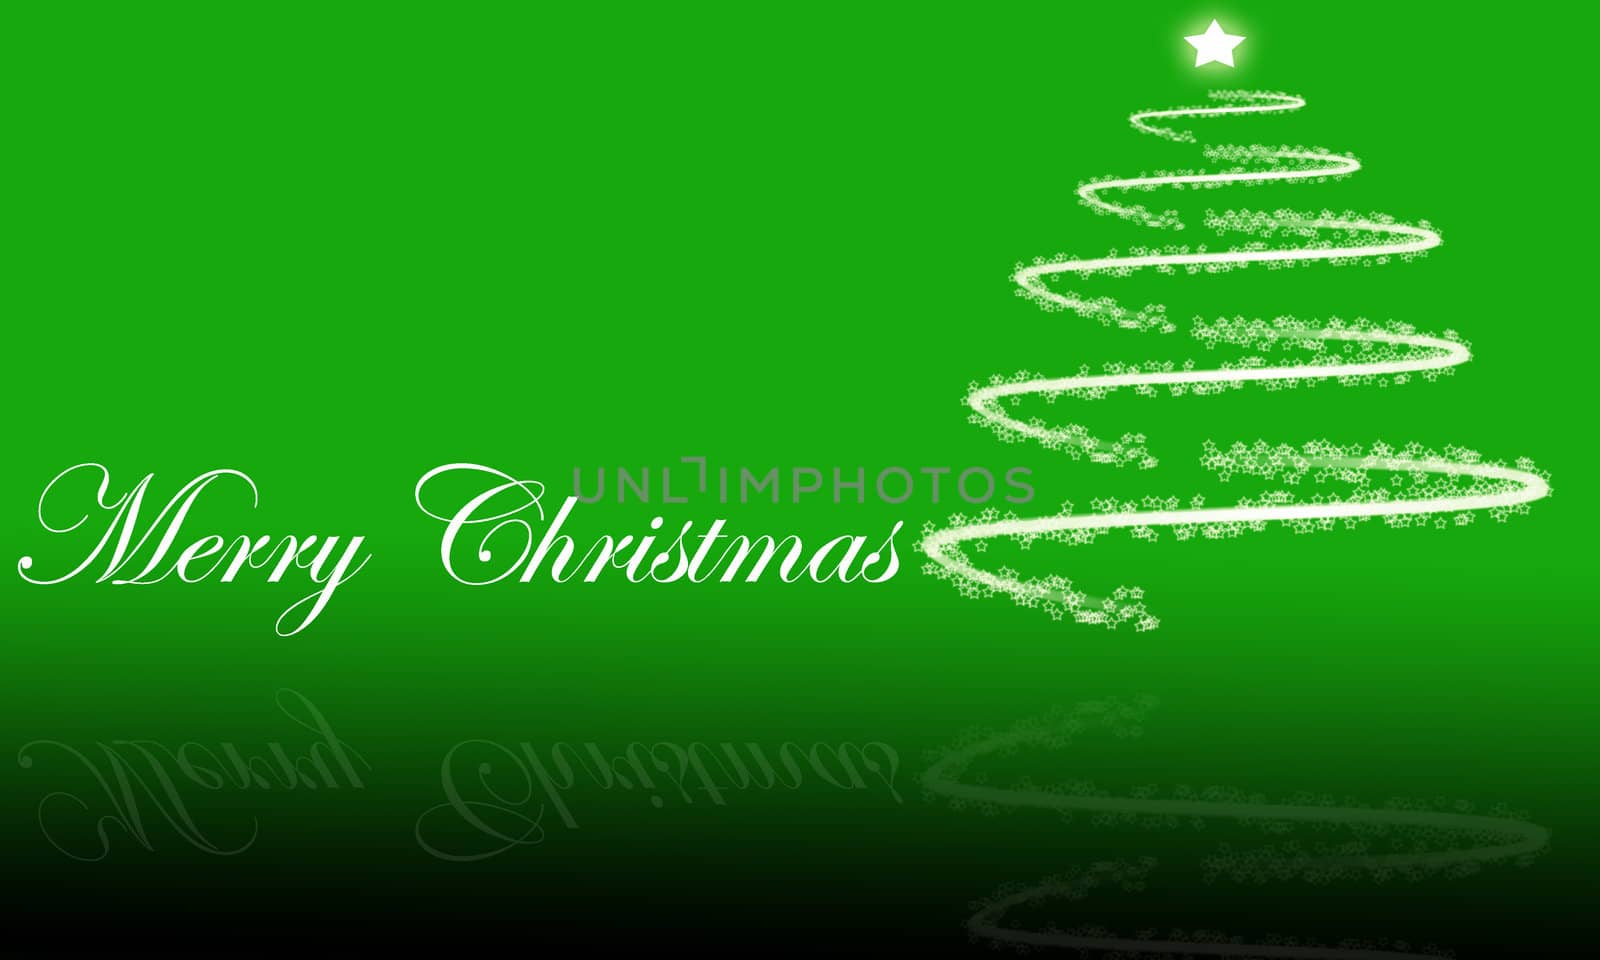 Merry Christmas text and Christmas tree on green background by ftlaudgirl